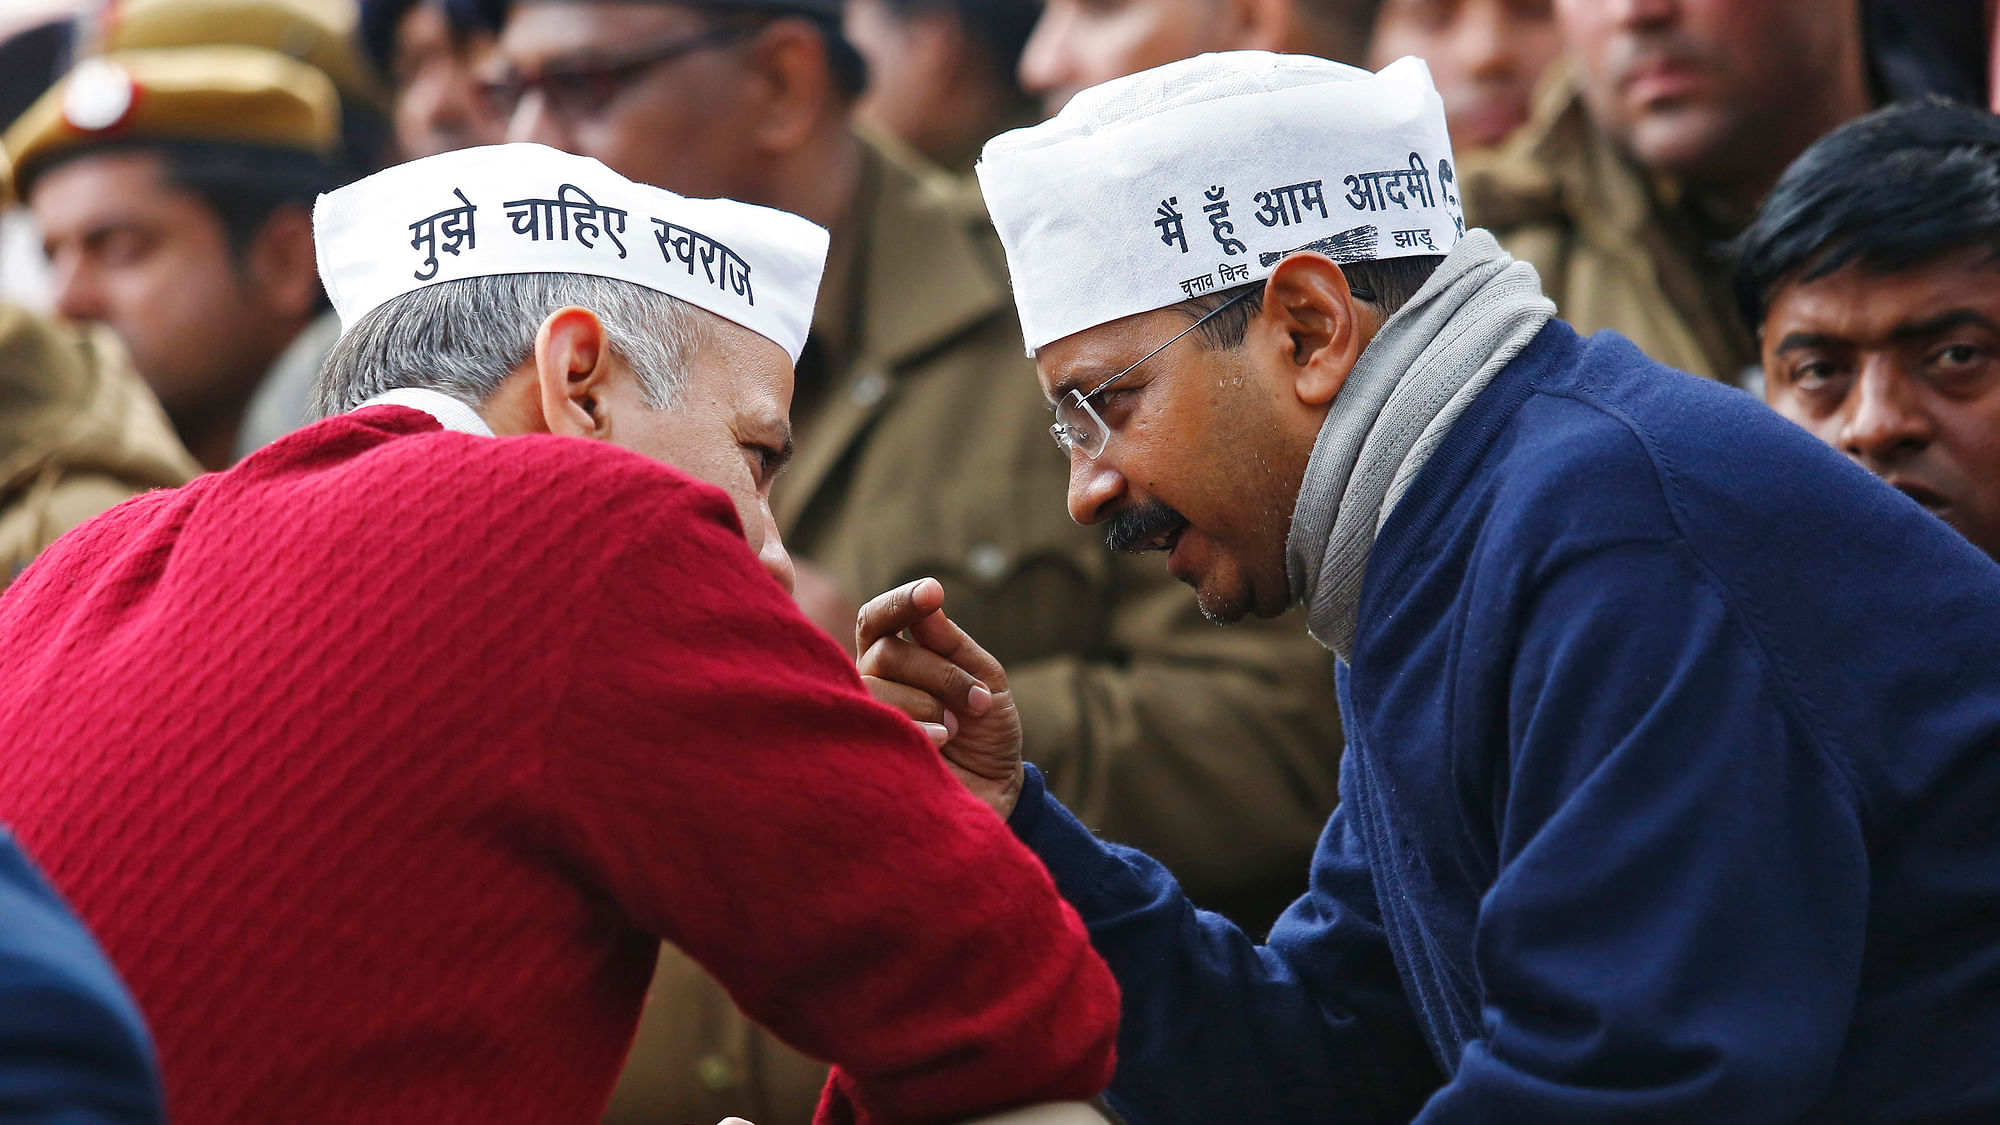 Delhi’s CM Arvind Kejriwal (R), leader of the Aam Aadmi Party (AAP), speaks with Delhi’s Education Minister Manish Sisodia during a protest in New Delhi. (Photo: Reuters)